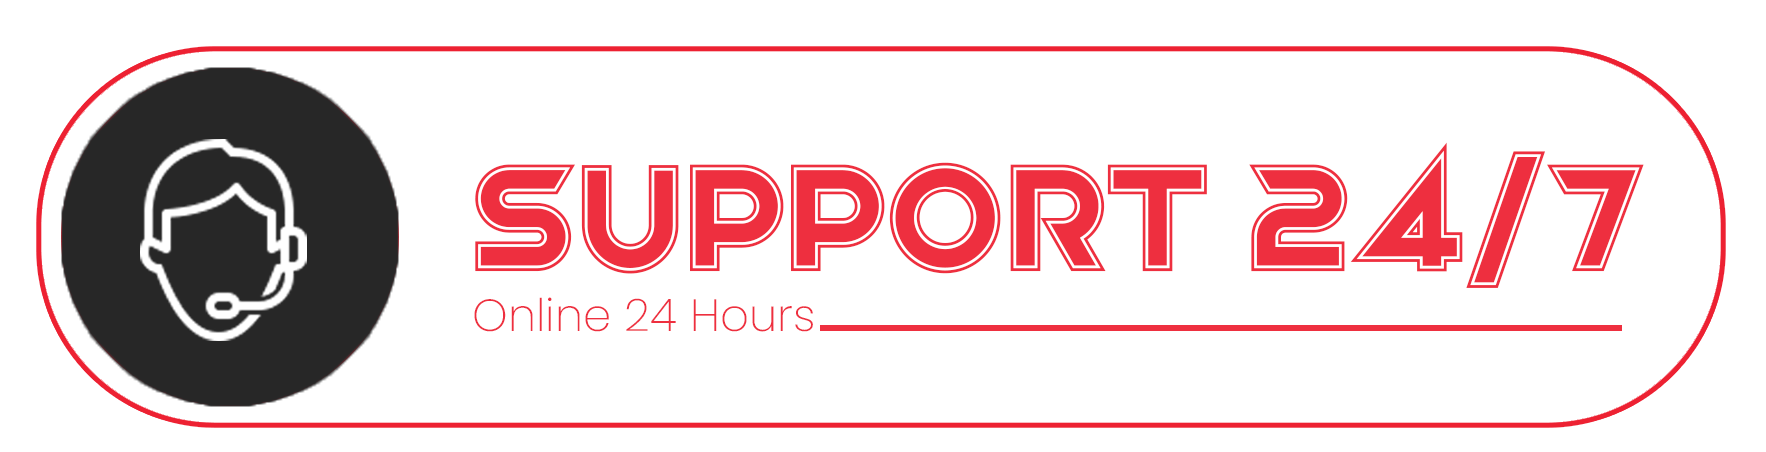 support 24x7 A